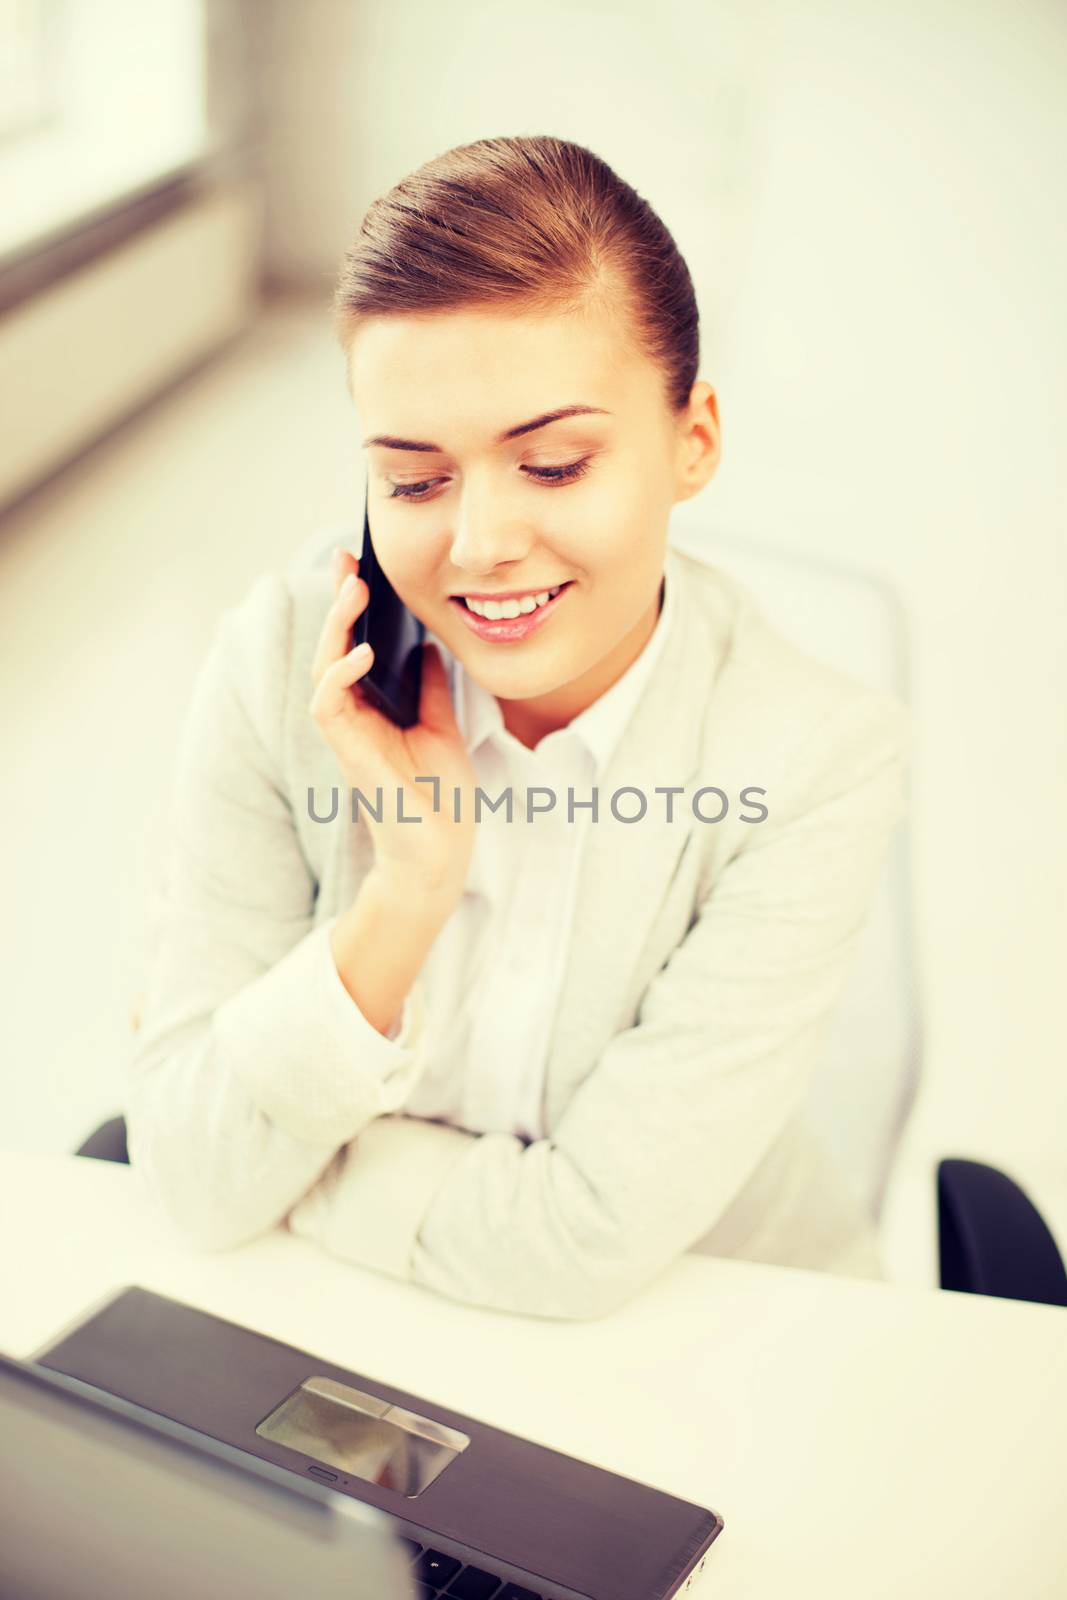 business and communication - smiling businesswoman with smartphone in office